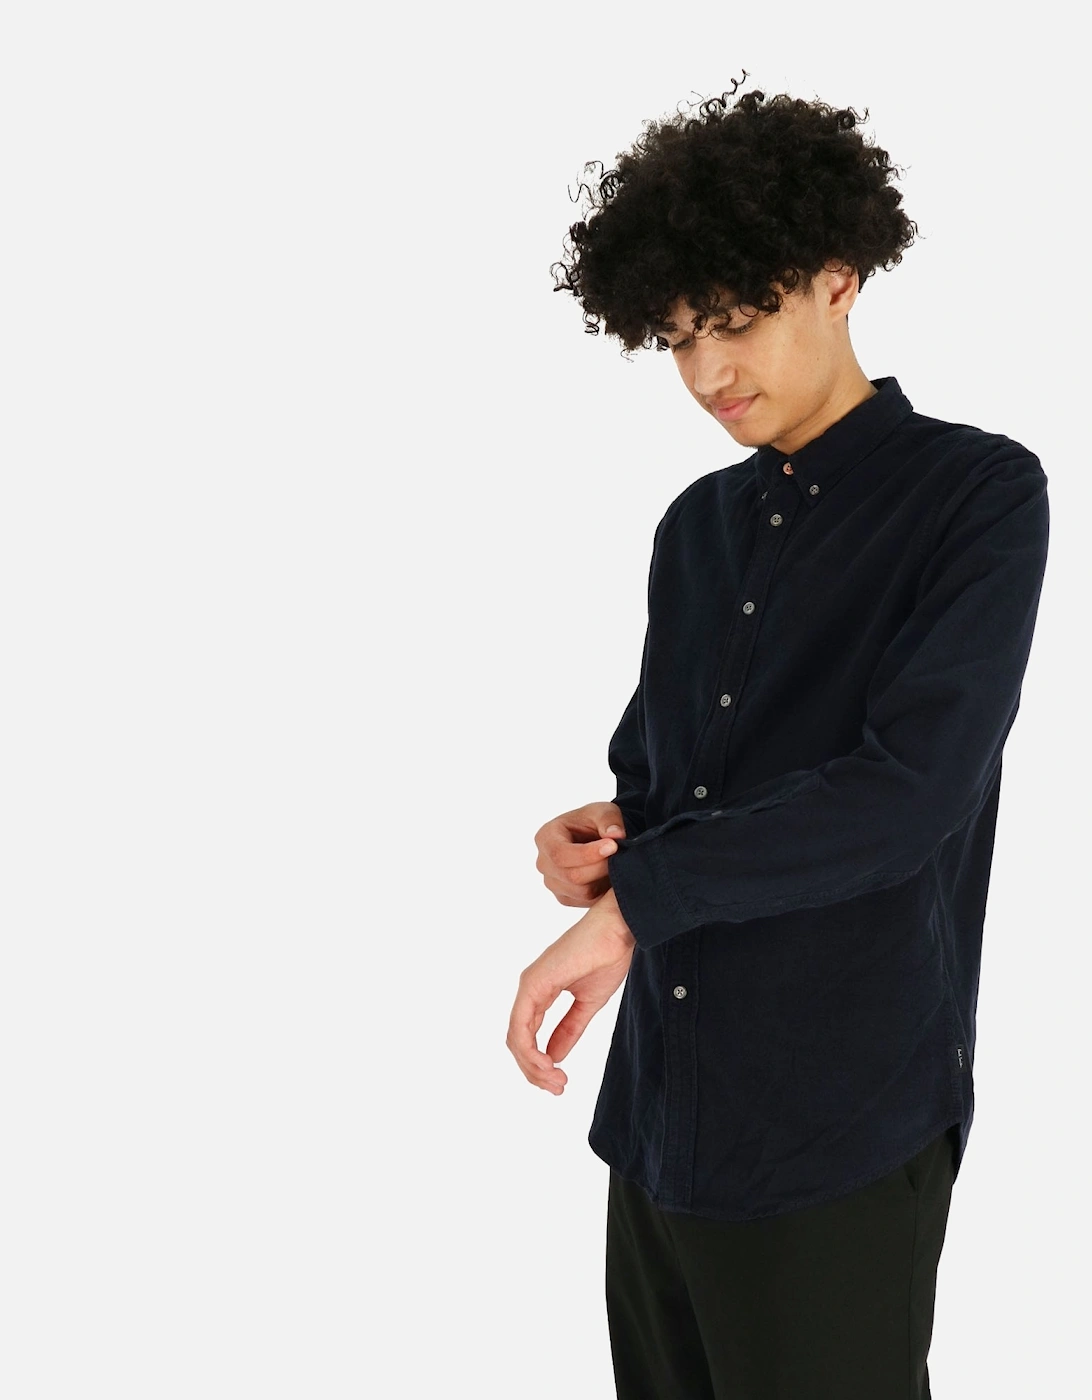 Tailored Button Down Navy Cord Shirt